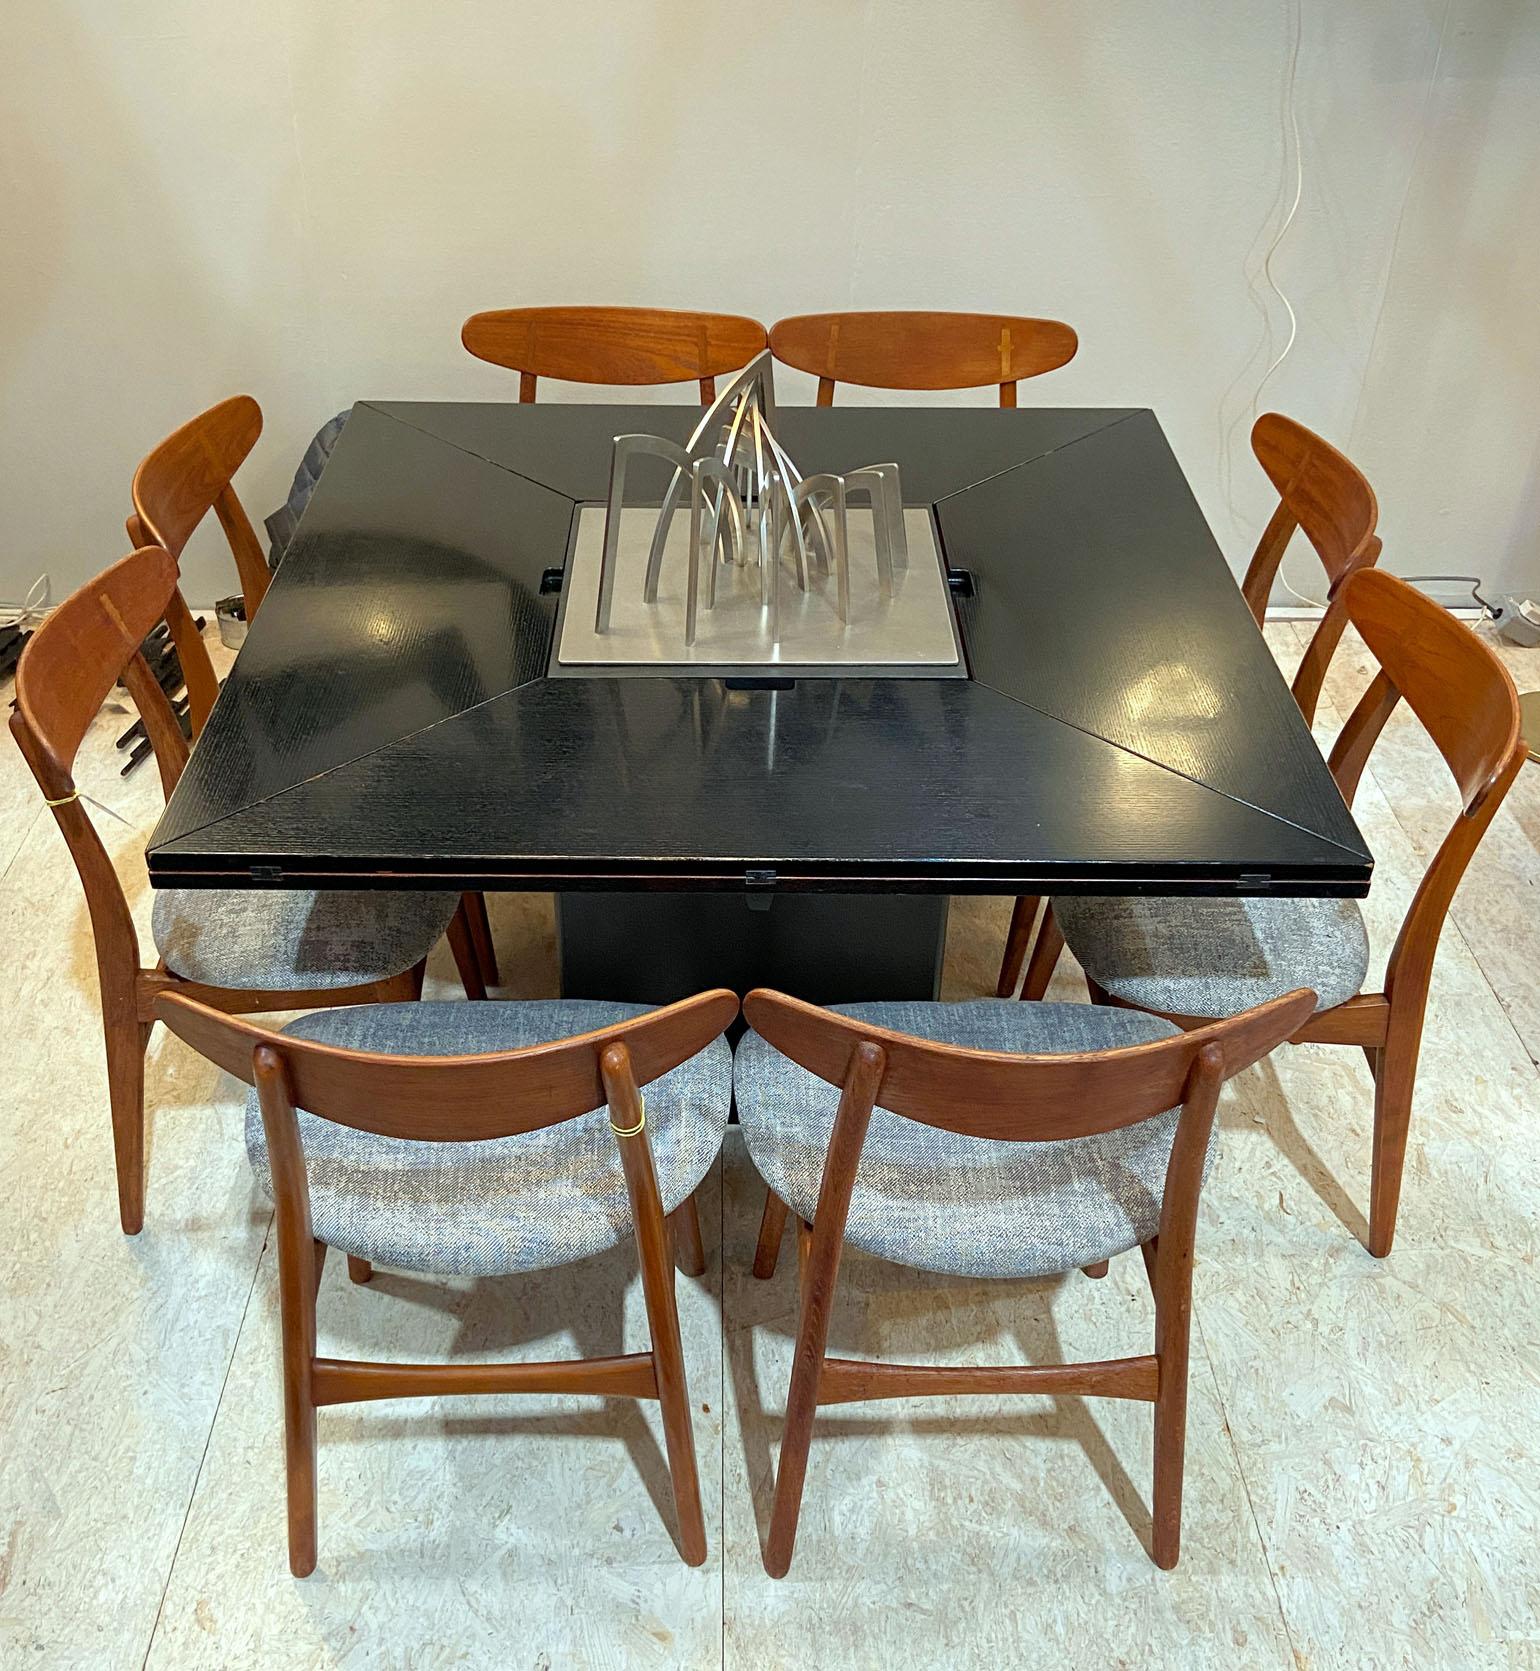 Late 20th Century Circante Square Dining Table for 8-12 Seatings by Pauvers van den Berghe For Sale